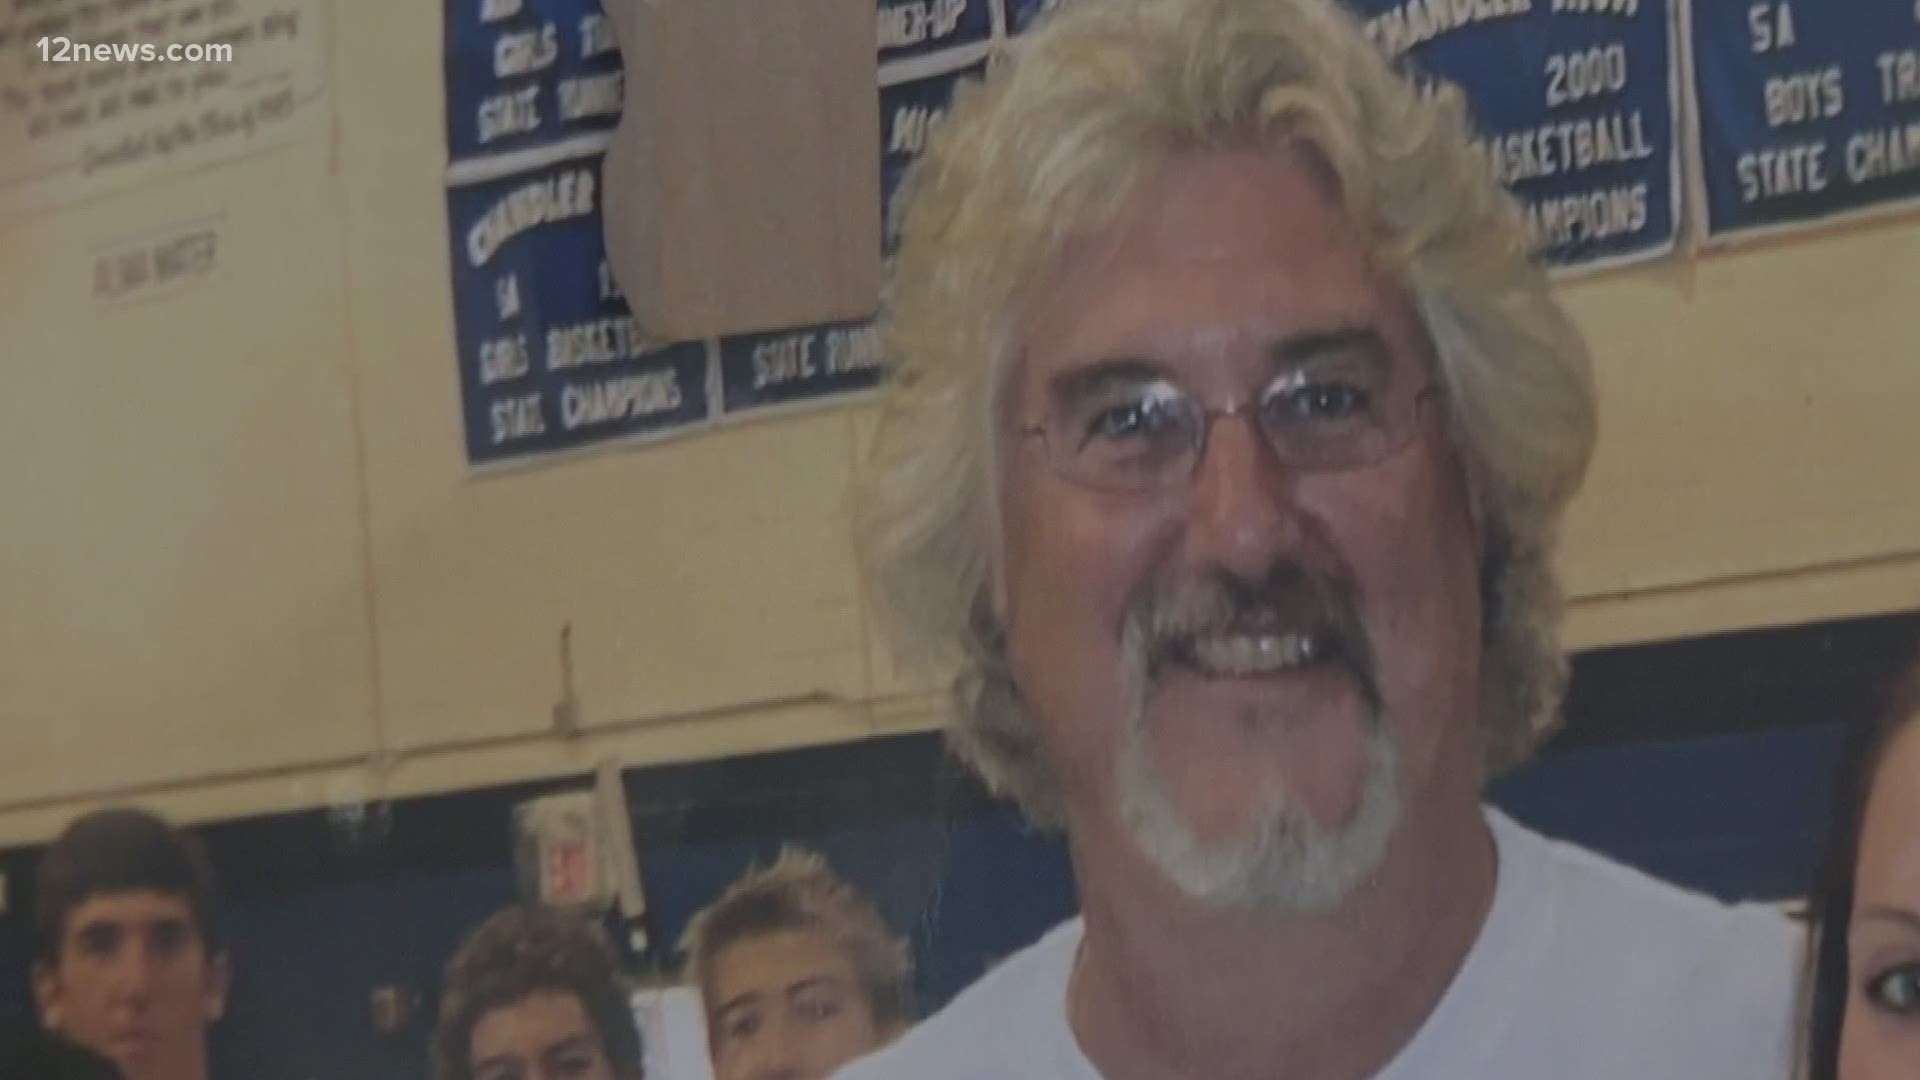 Kerry Crosswhite is a high school hero and coach who is now fighting for his life. He has been in the hospital since the beginning of July battling the coronavirus.